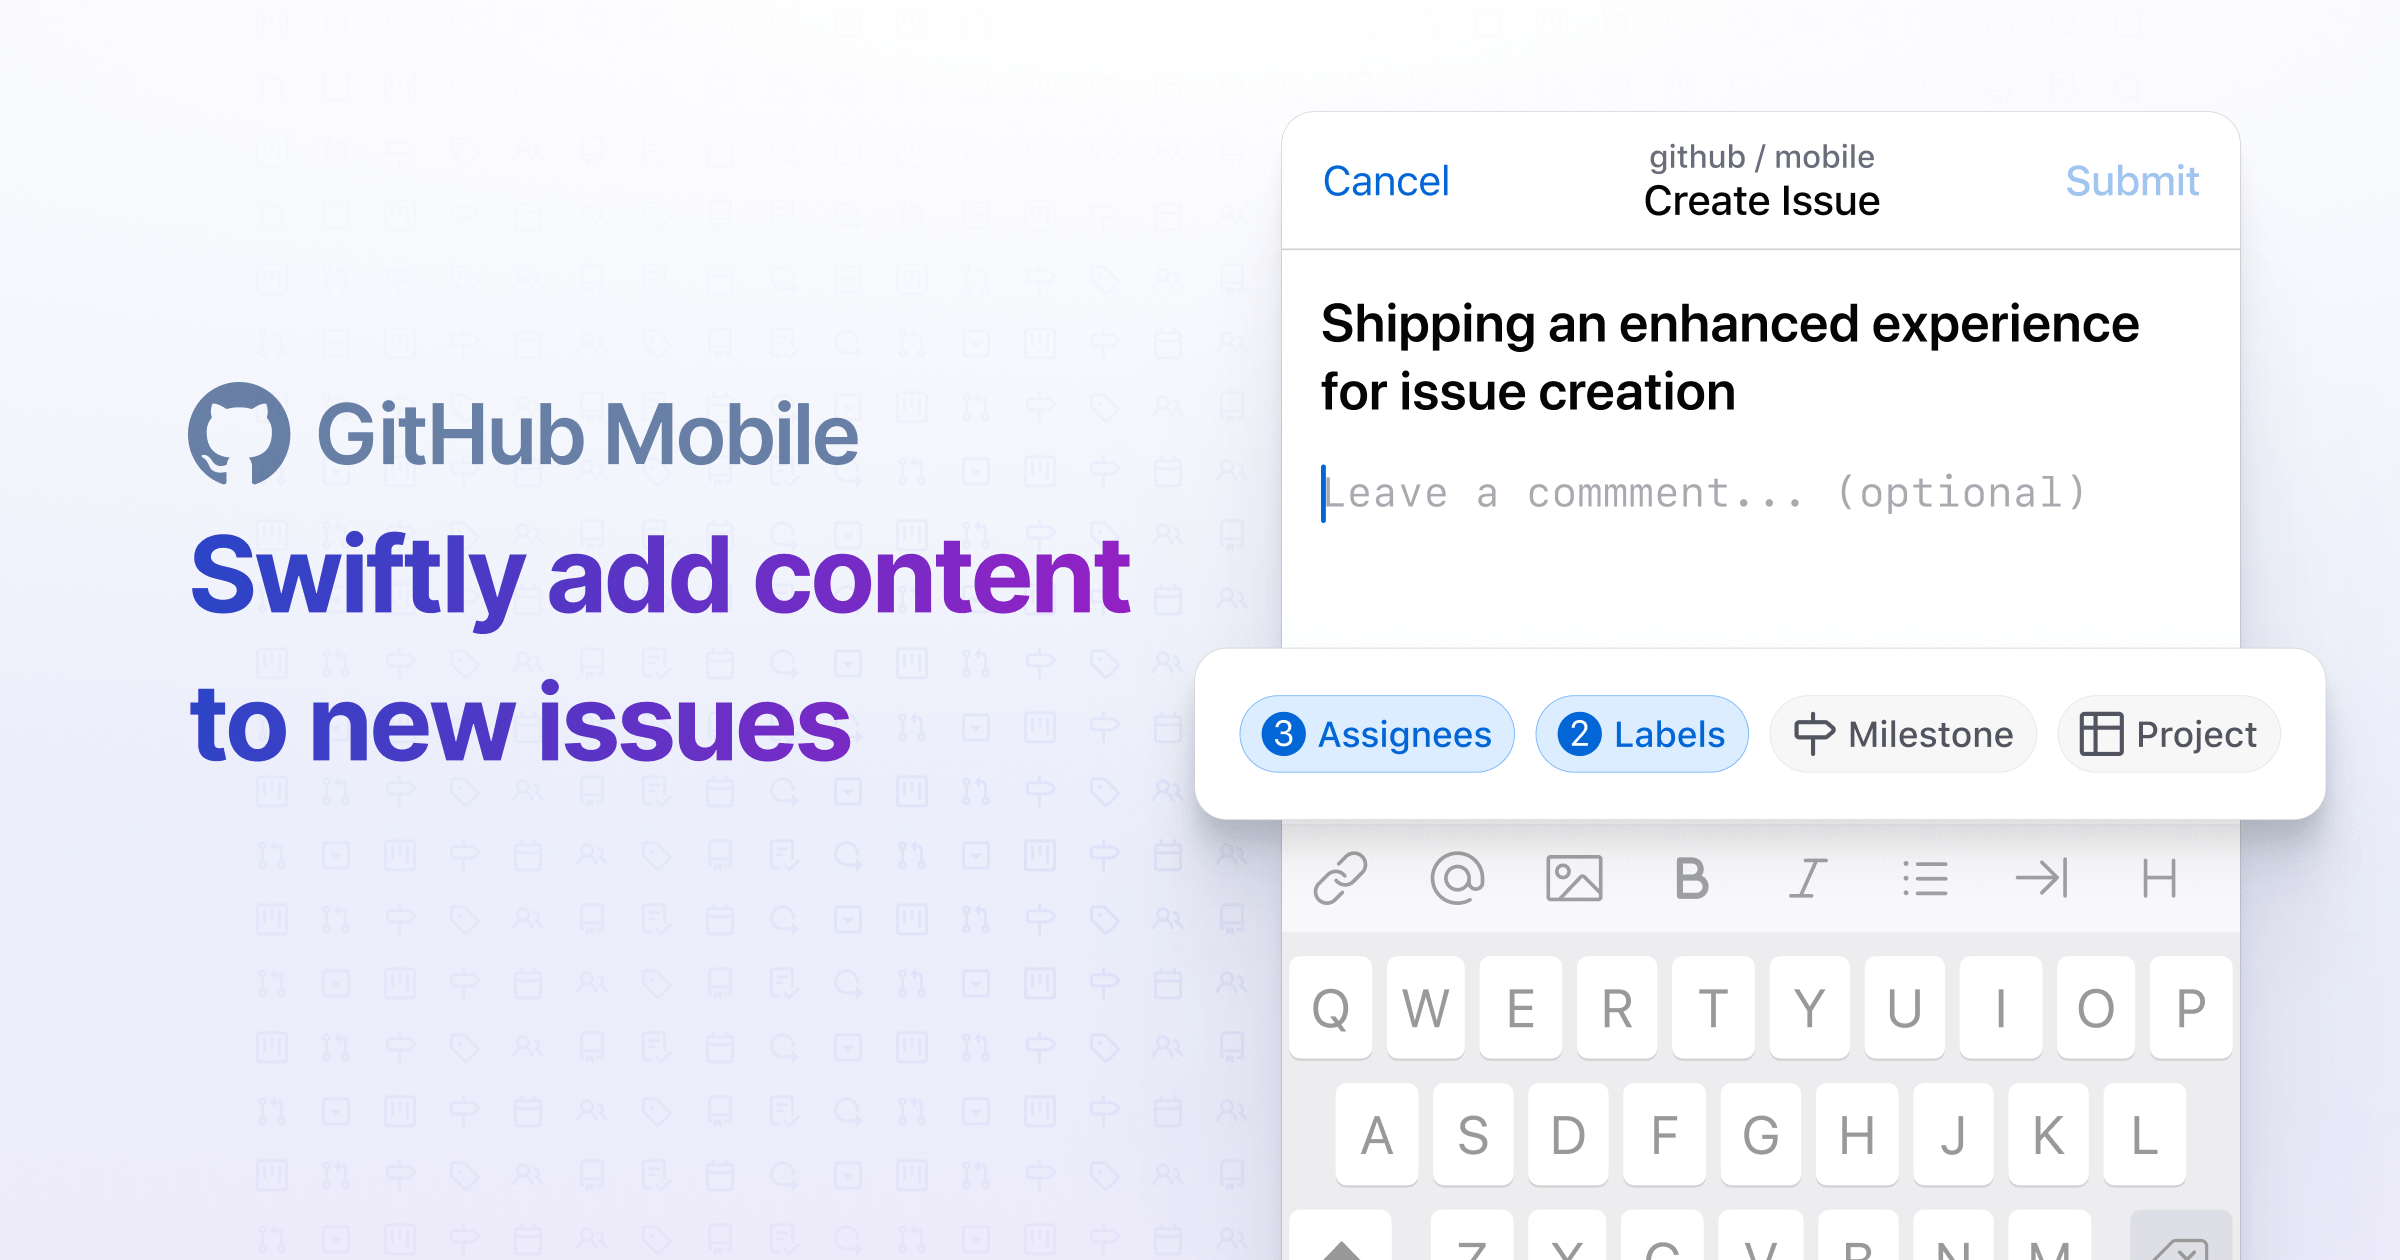 Swiftly add content to new issues on GitHub Mobile